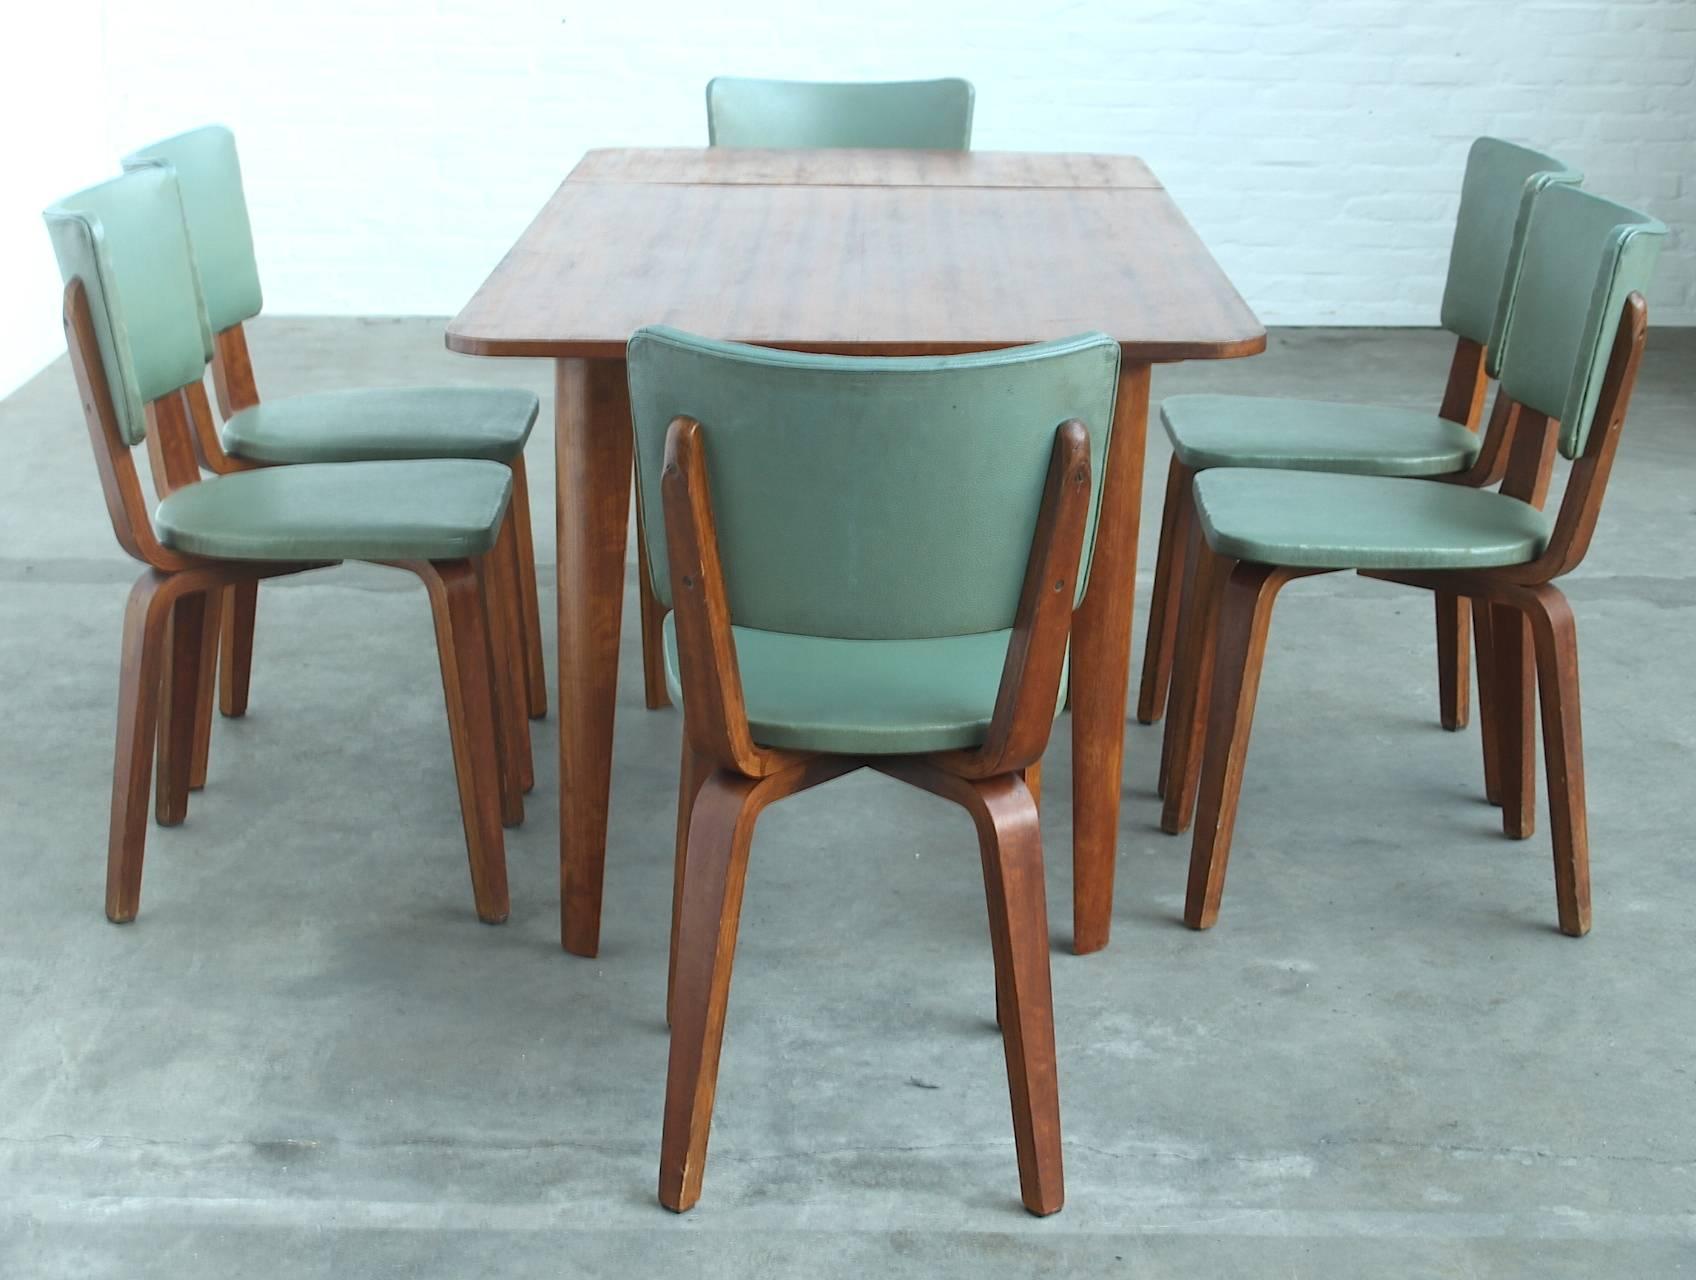 Very rare dining room set of an extendable dining table with its six matching chairs upholstered in wonderful sea green coloured leatherette, which is the original upholstery. The green upholstery combined with the tanned plywood of the chairs and